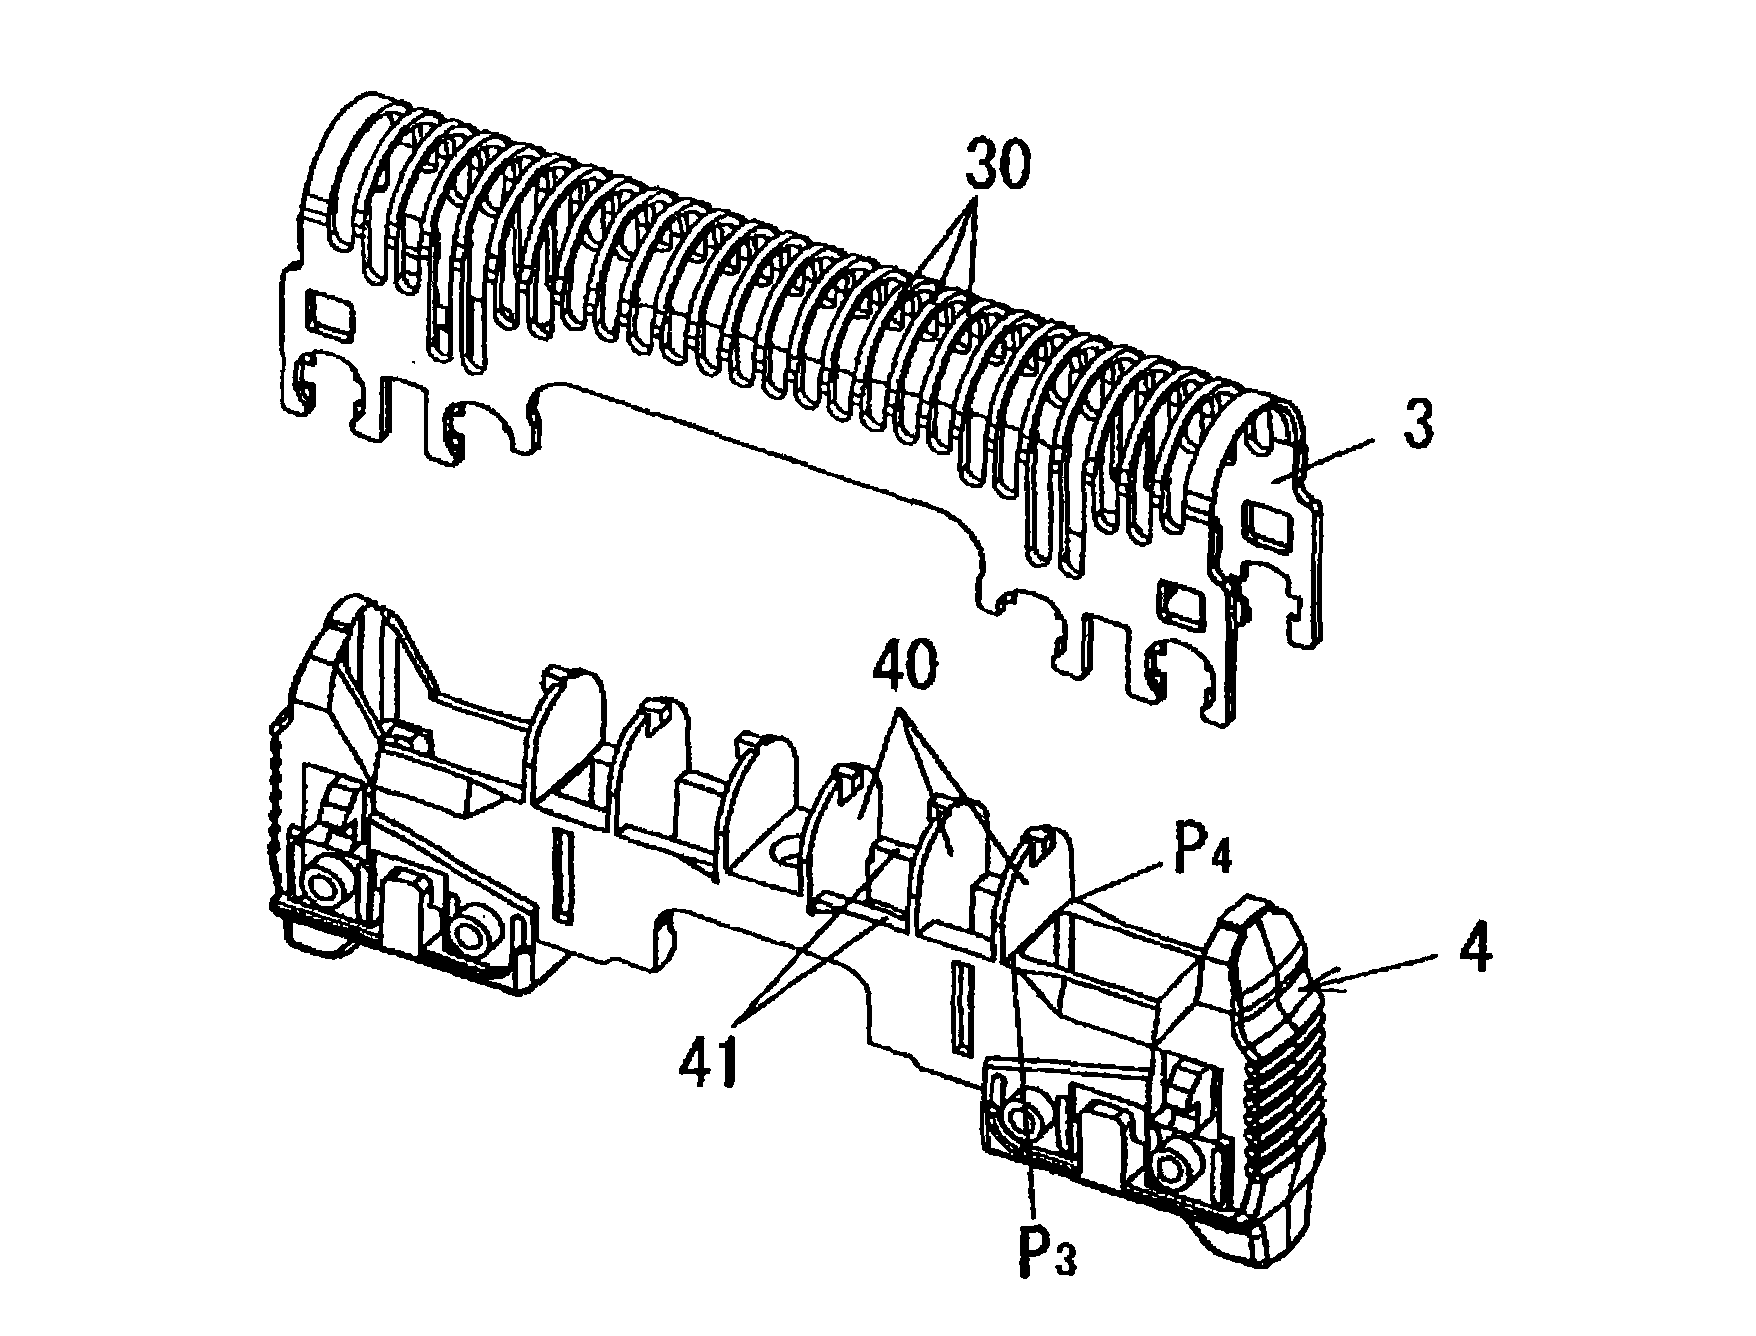 Inner blade for reciprocating electric shaver